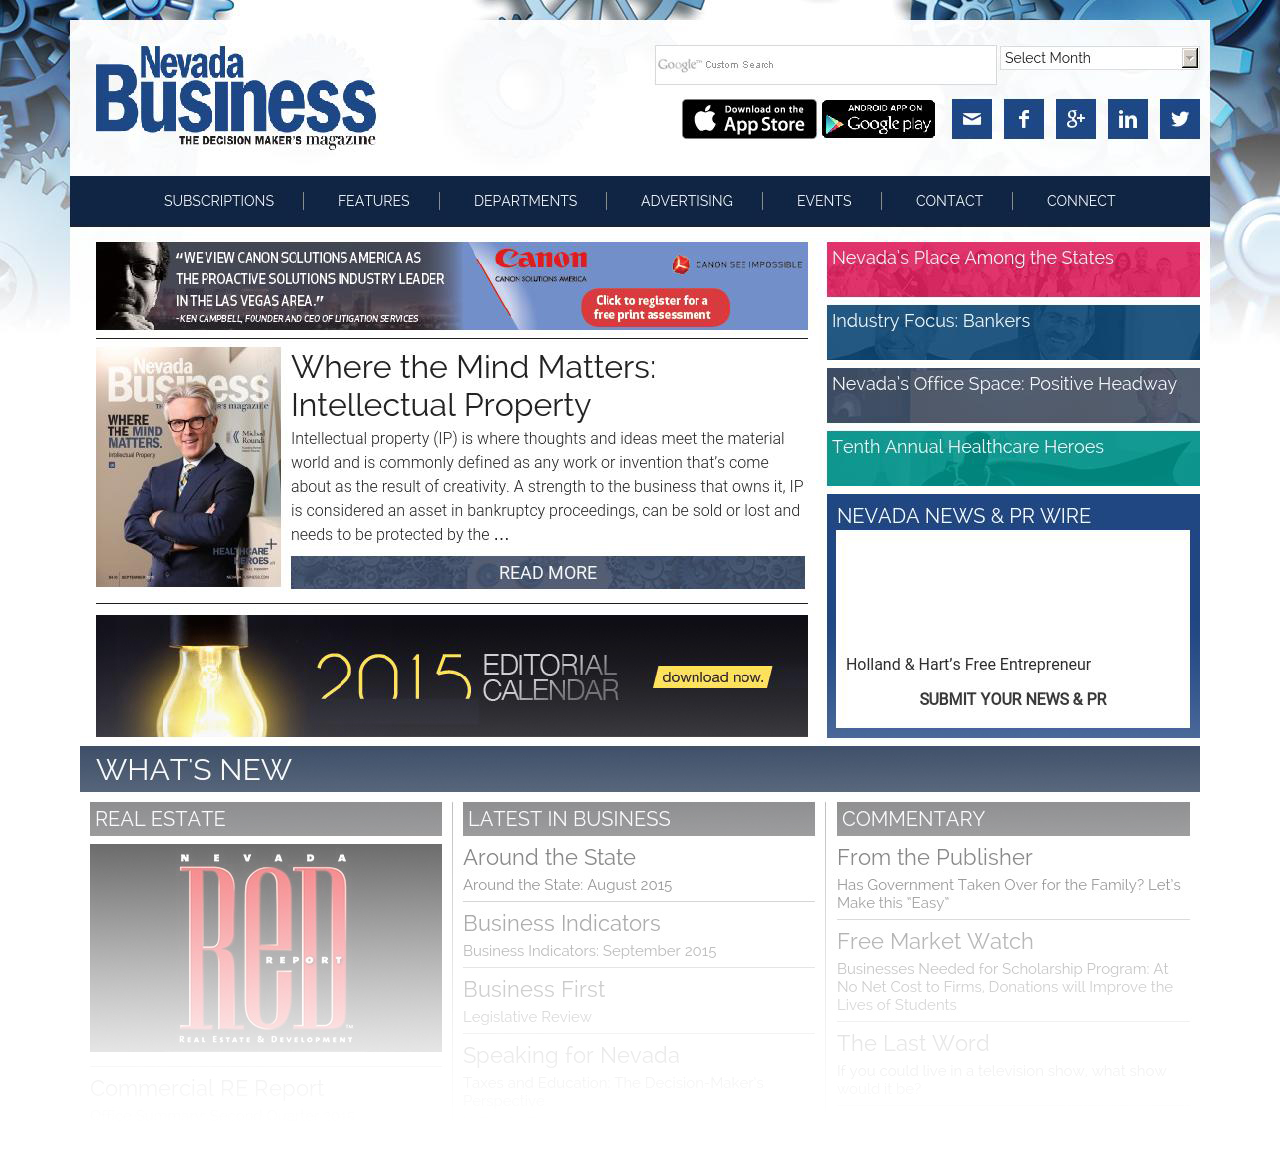 Nevada Central Media created a web design for the business publication that is mobile-friendly with a new color and font scheme.